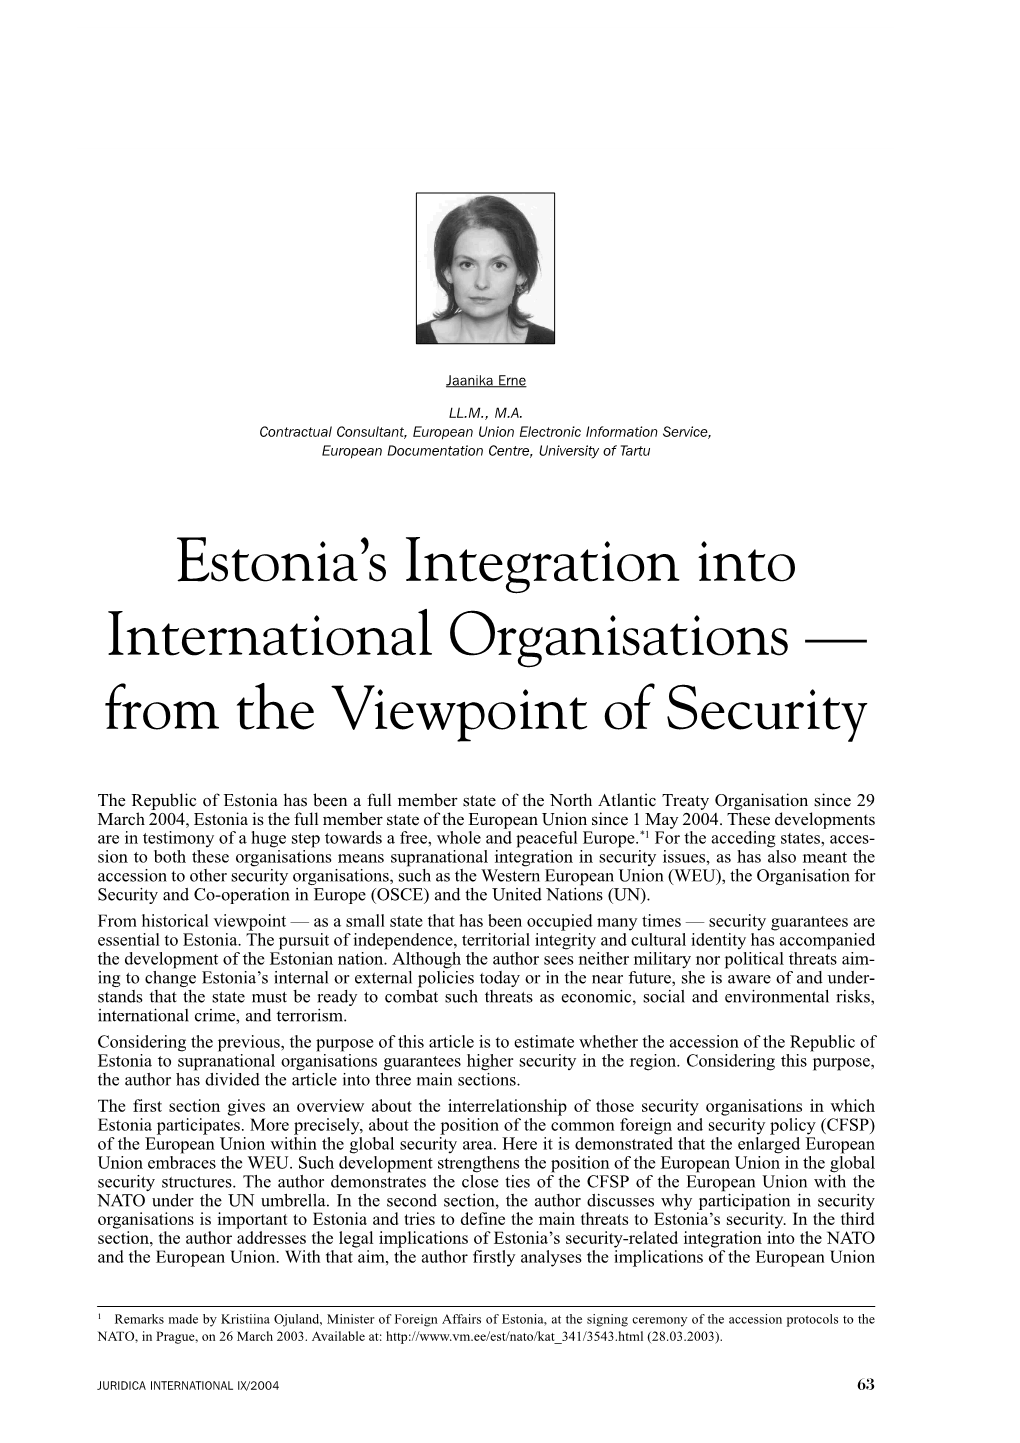 Estonia's Integration Into International Organisations — from the Viewpoint